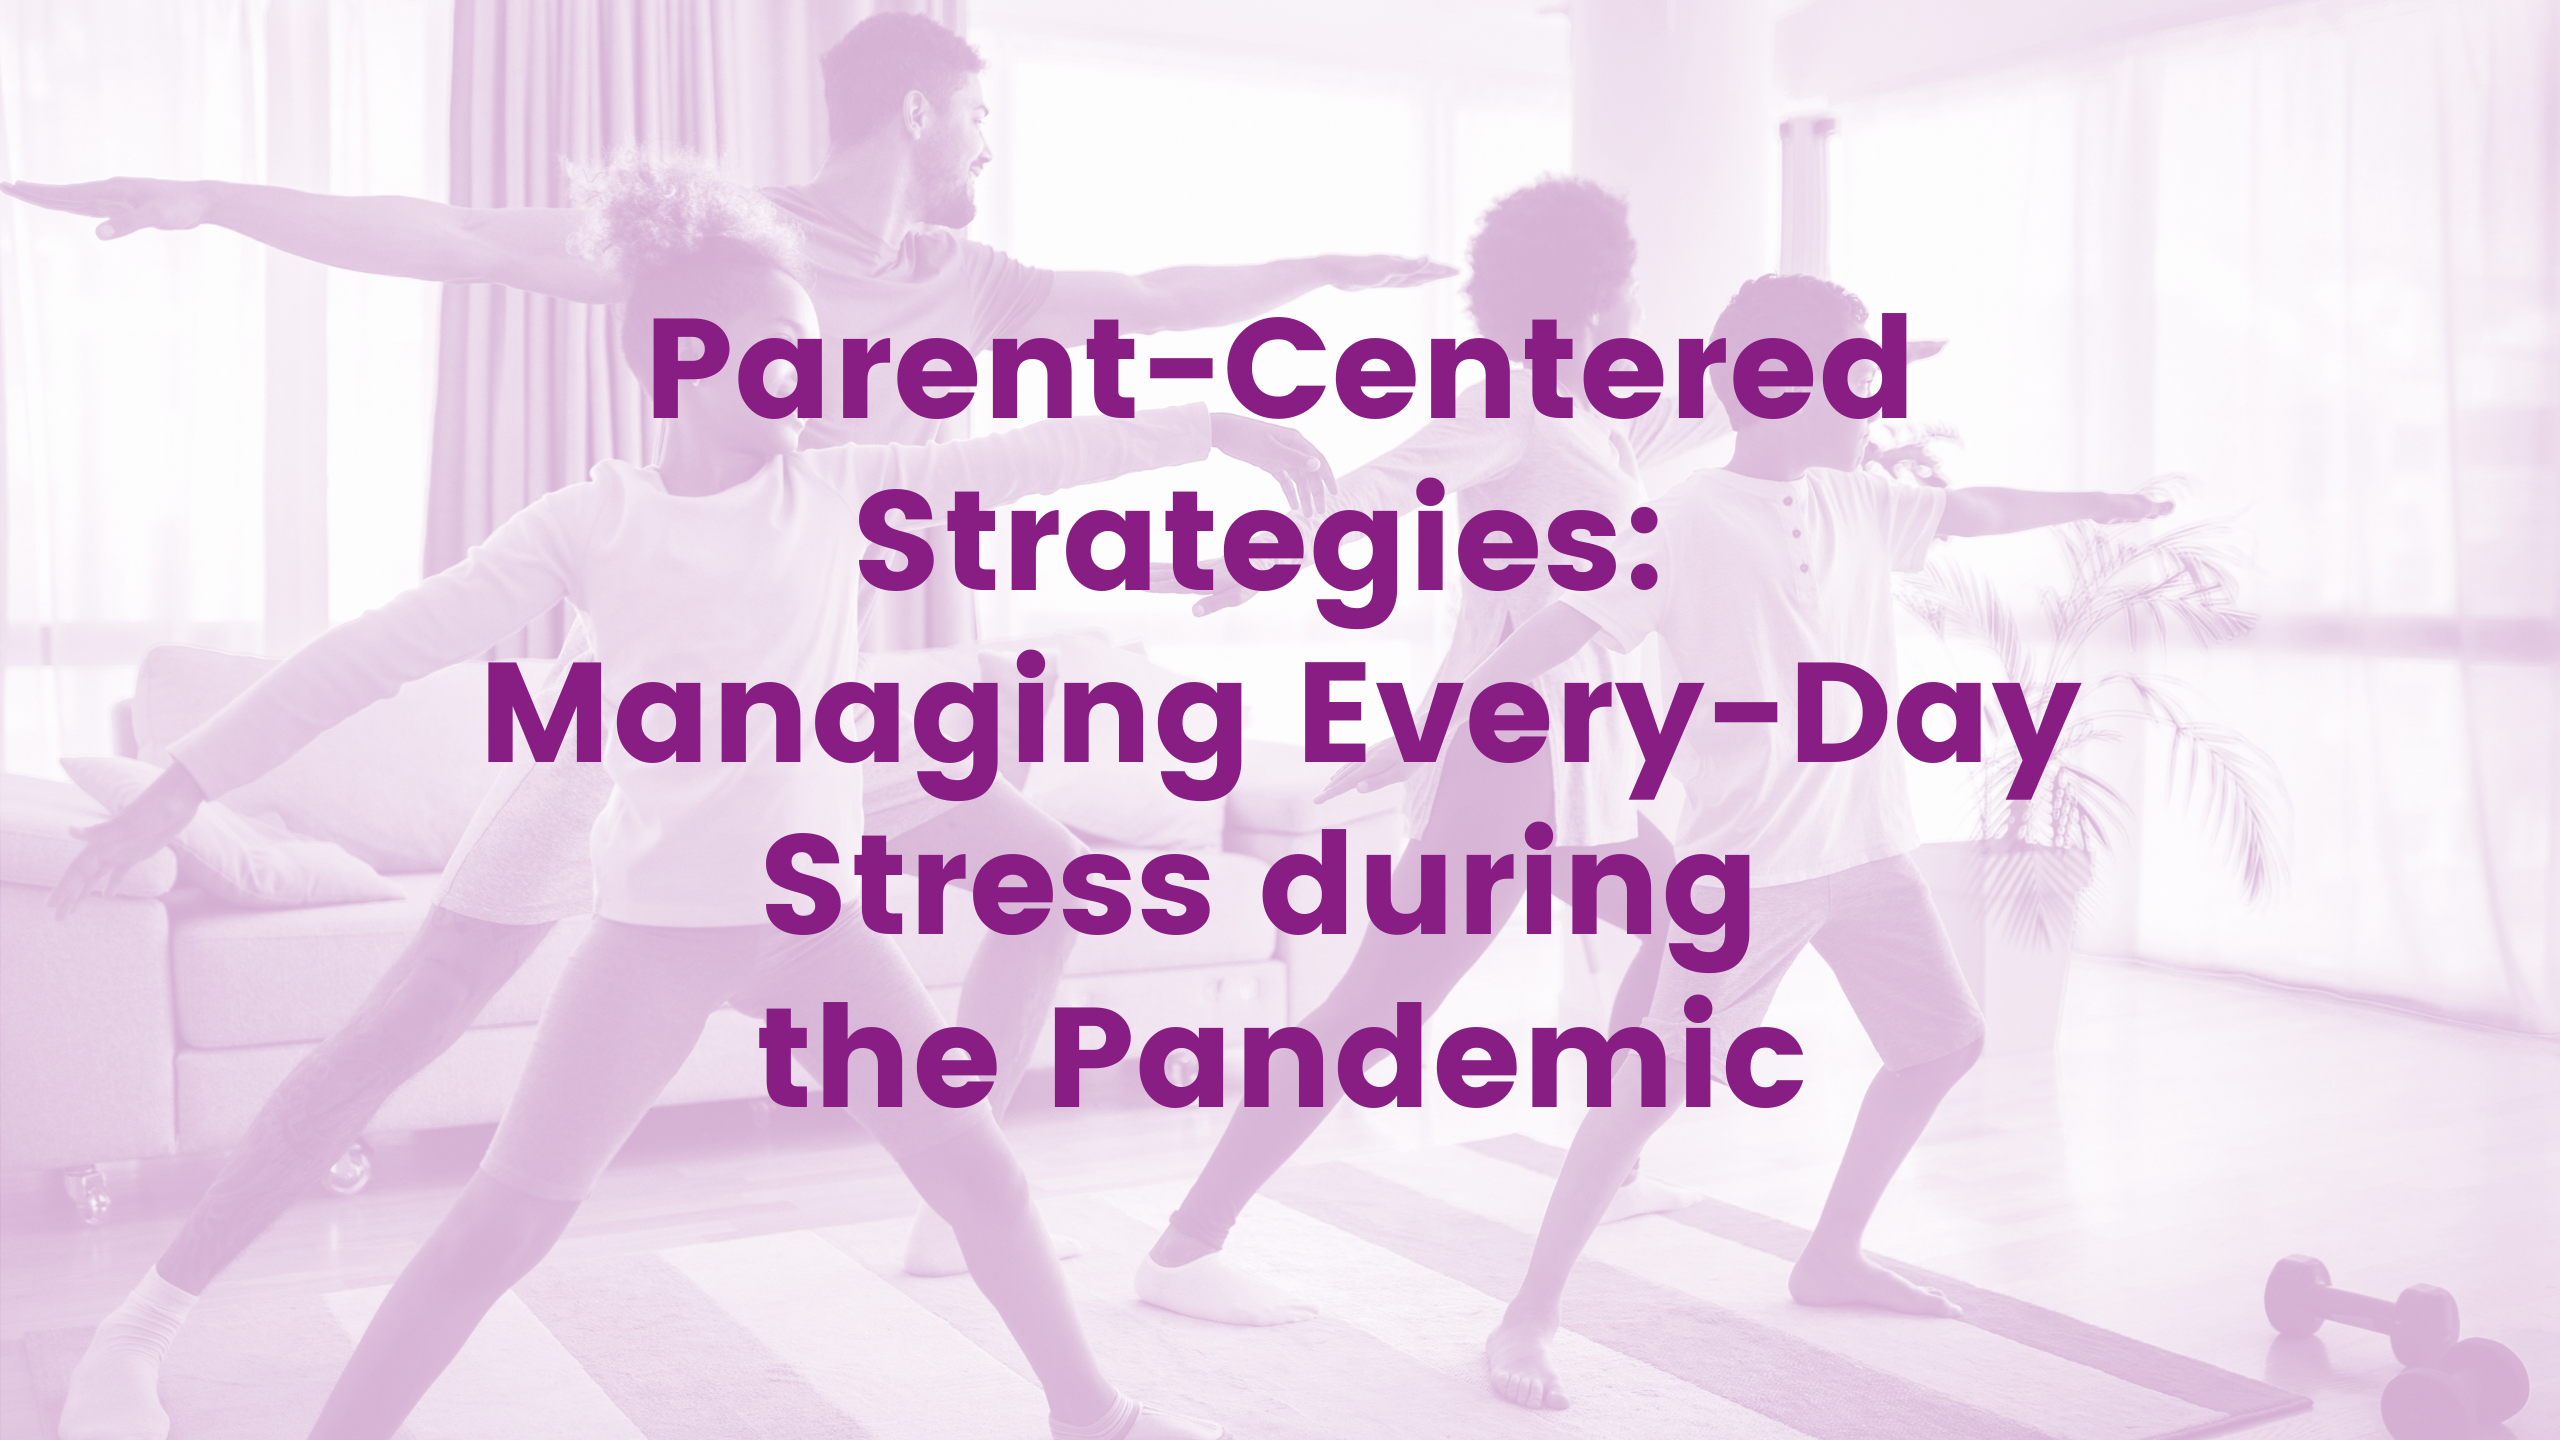 Parent-Centered Strategies: Managing Every-Day Stress during the Pandemic